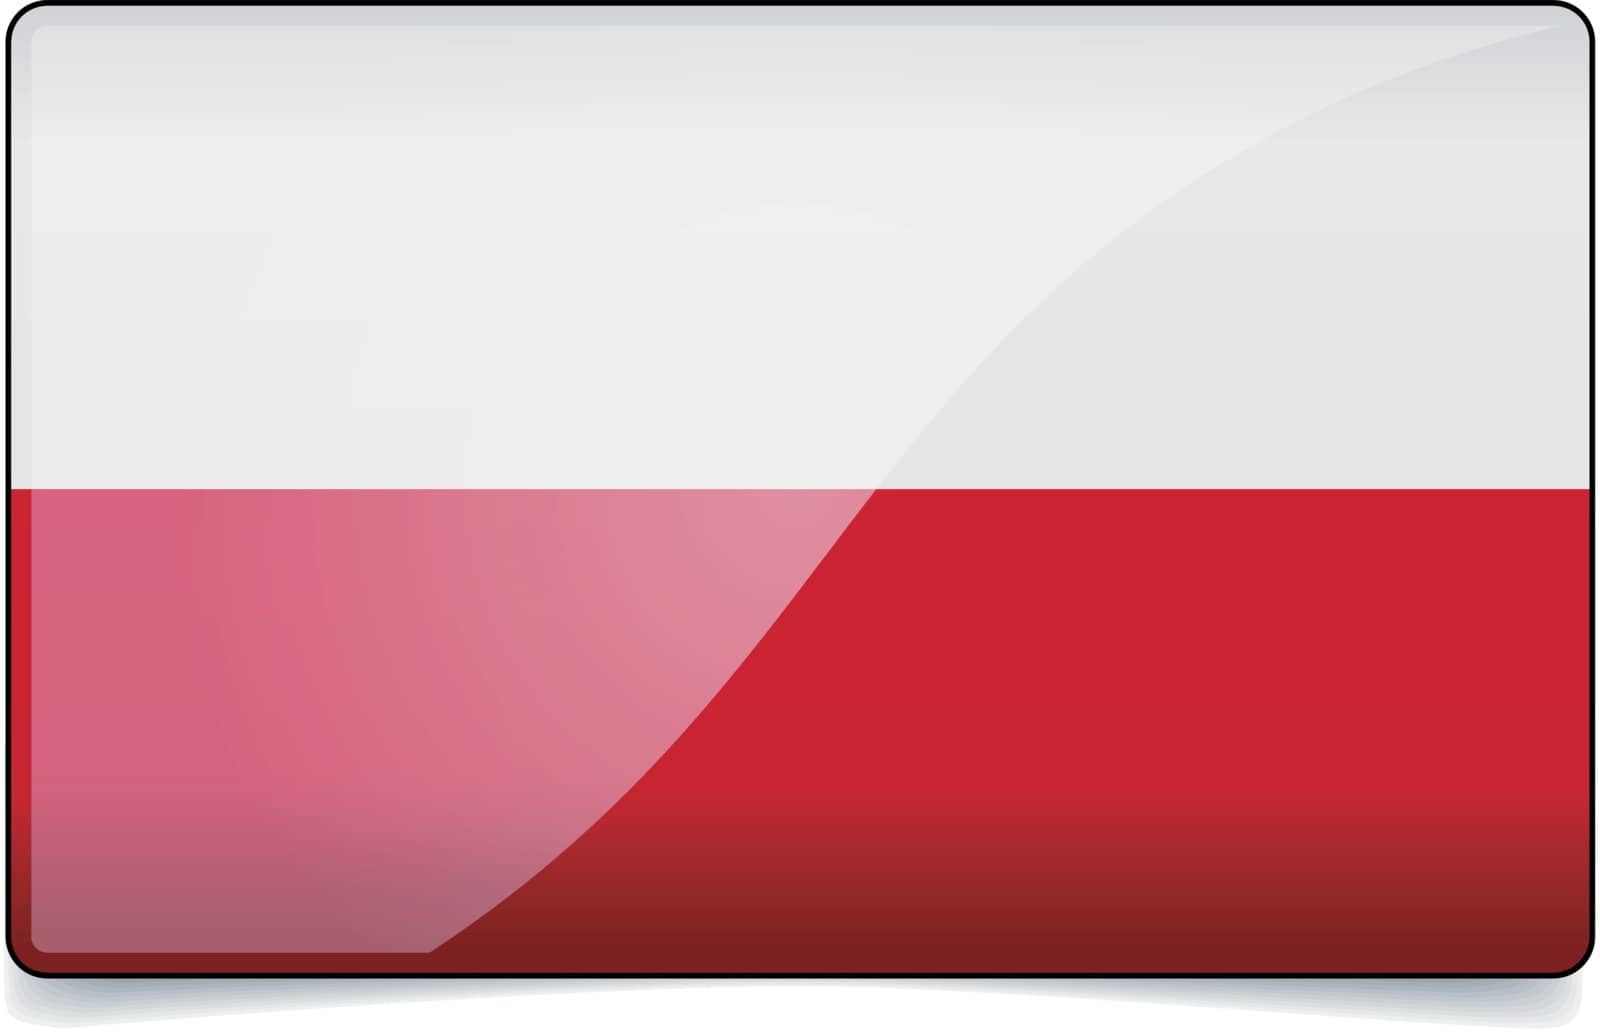 Poland flag button with reflection and shadow. Isolated glossy flag of Poland.